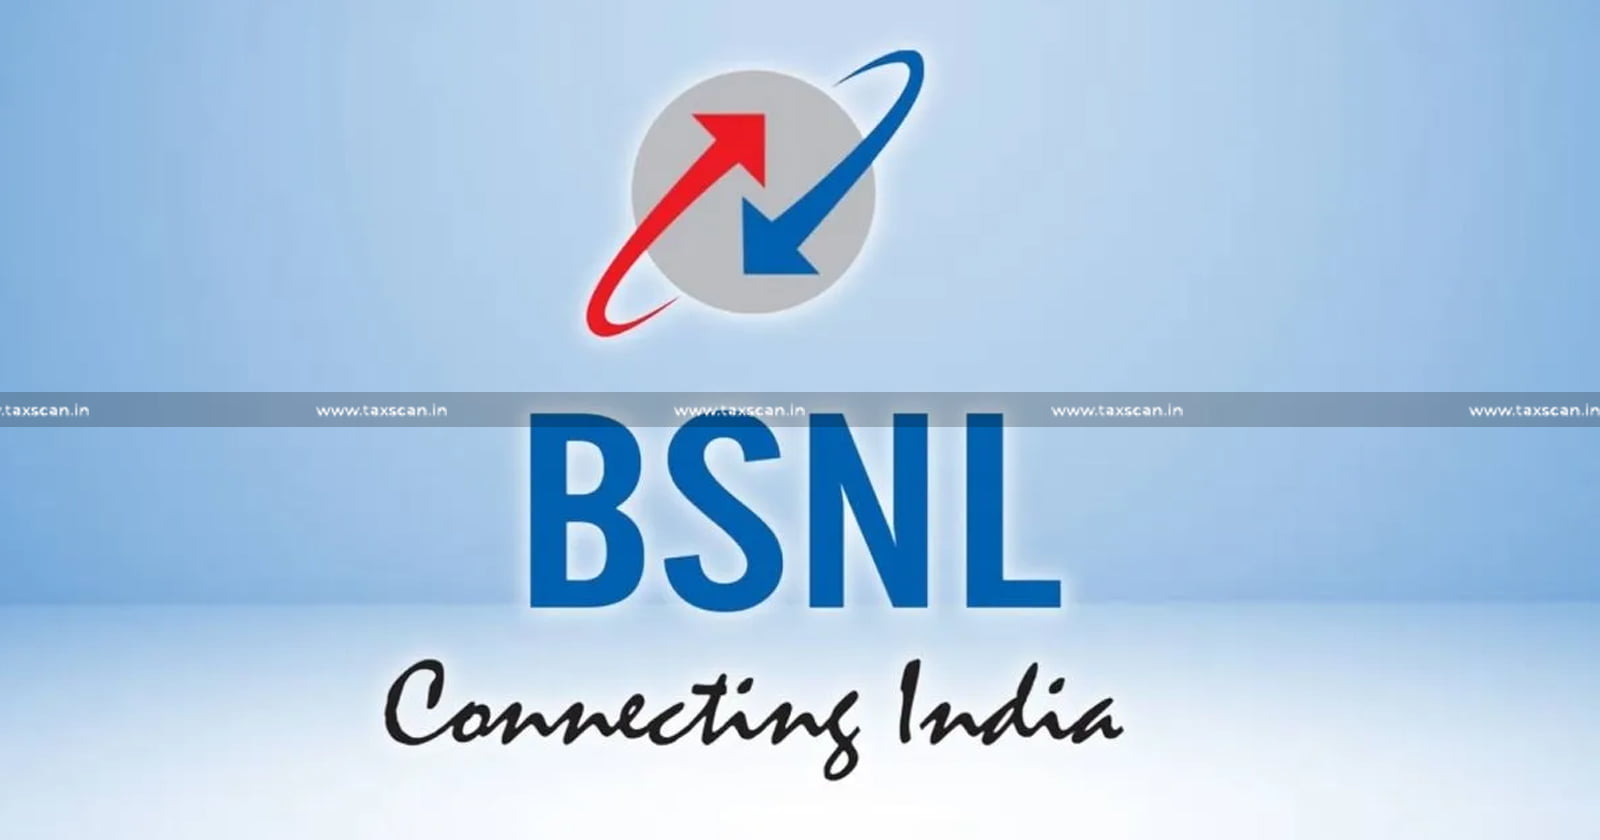 No Service Tax - Service Tax - Services of Sale And Purchase - SIM Cards - BSNL - CESTAT - taxscan